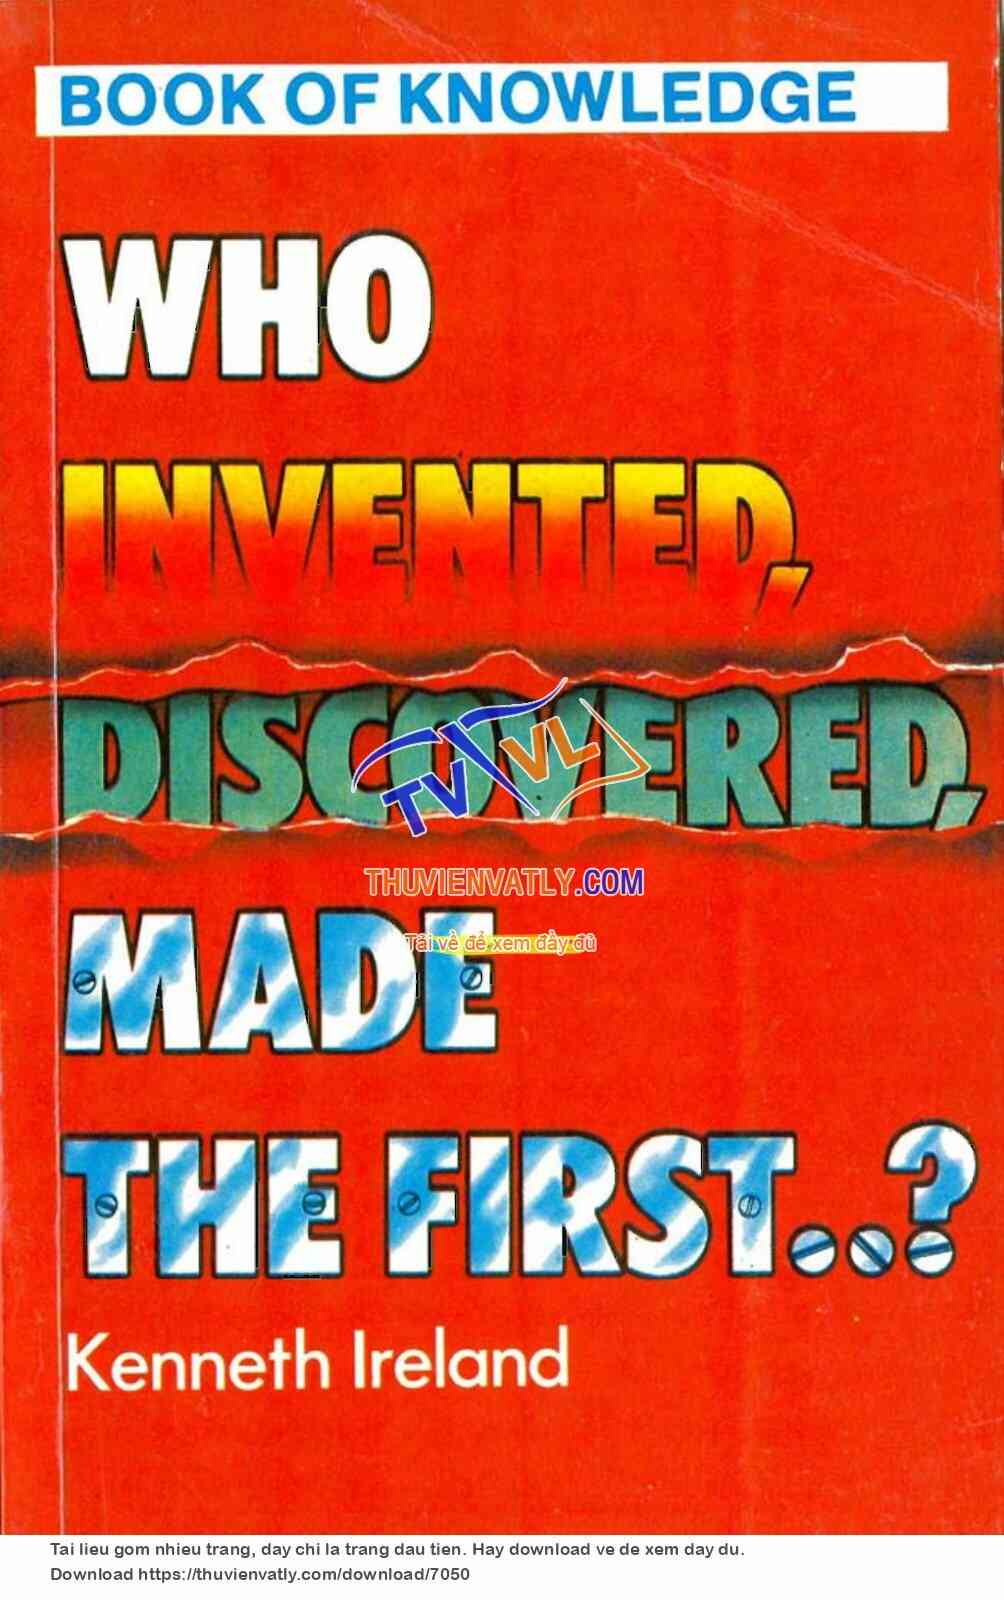 Who Invented, Discovered, Made The First...